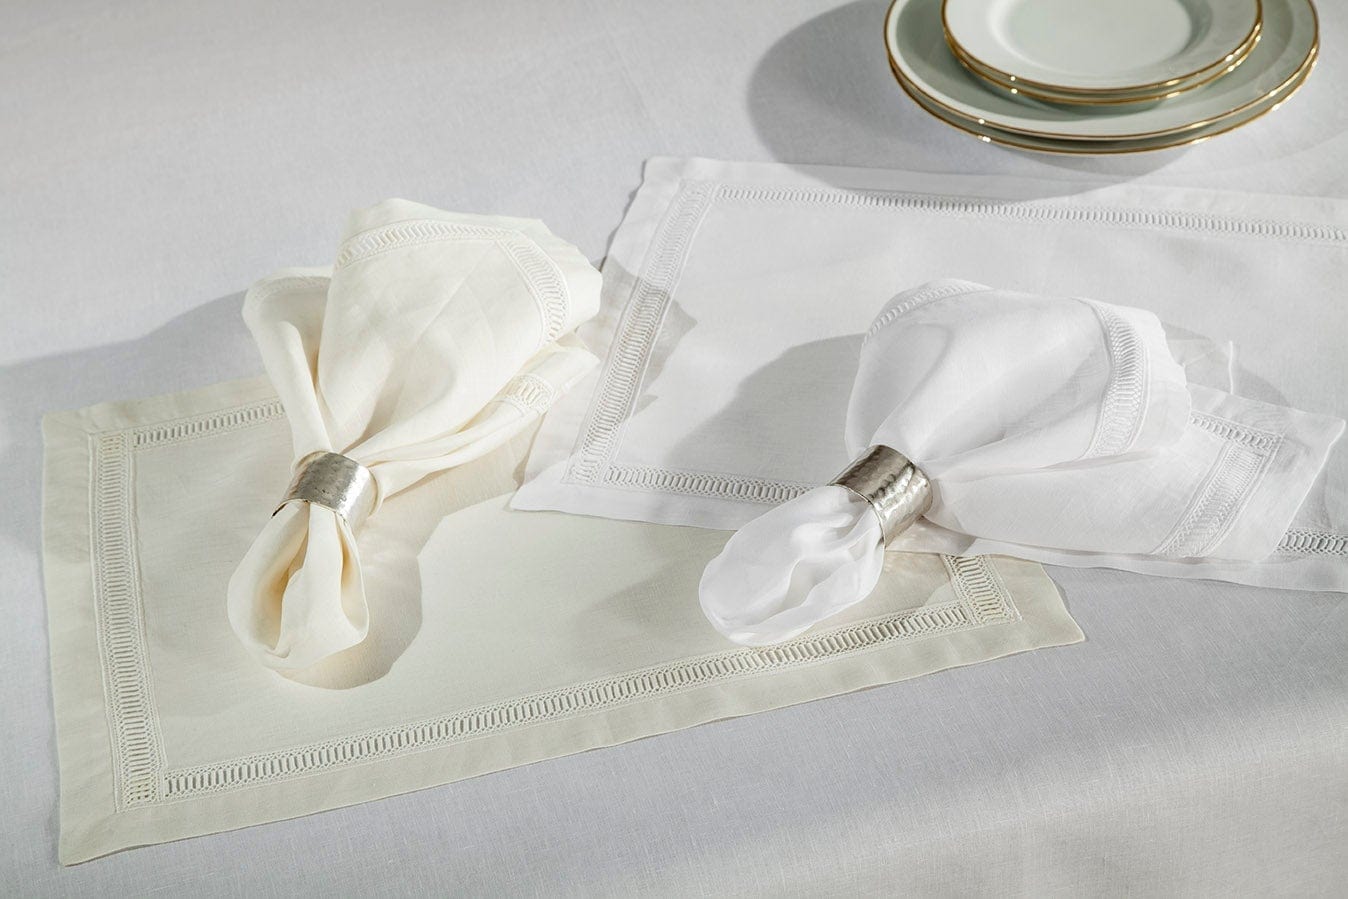 Home Treasures Home Treasures Doric Dinner Napkins - Set of 6 (Available in 2 Colors)